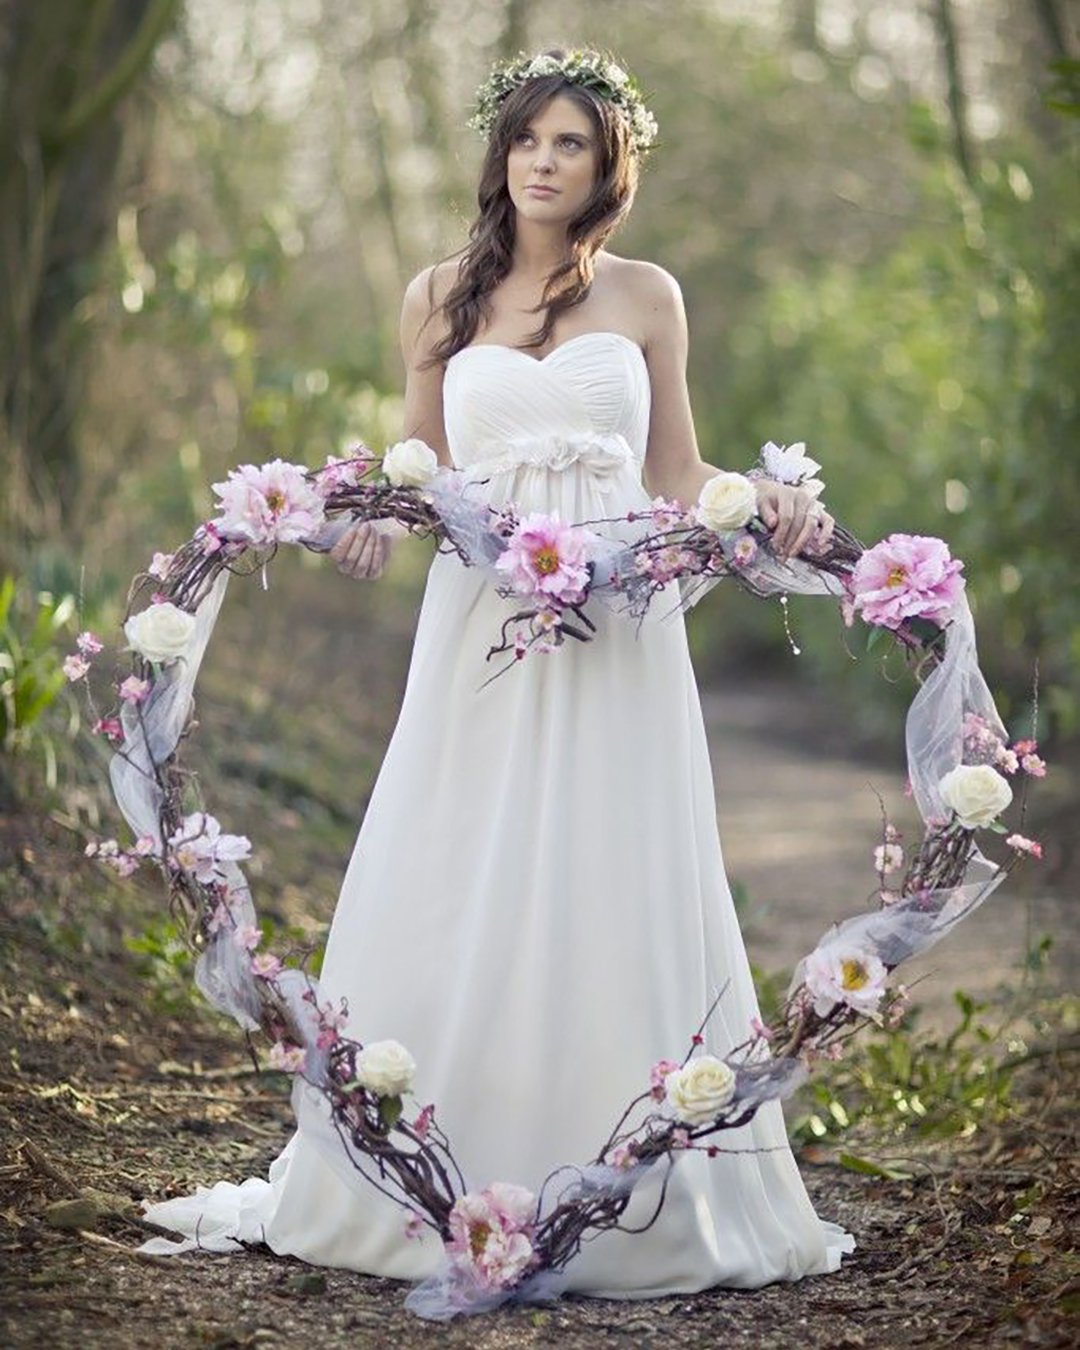 heart wedding photos bride with floral heart in a wood mark tattersall photography